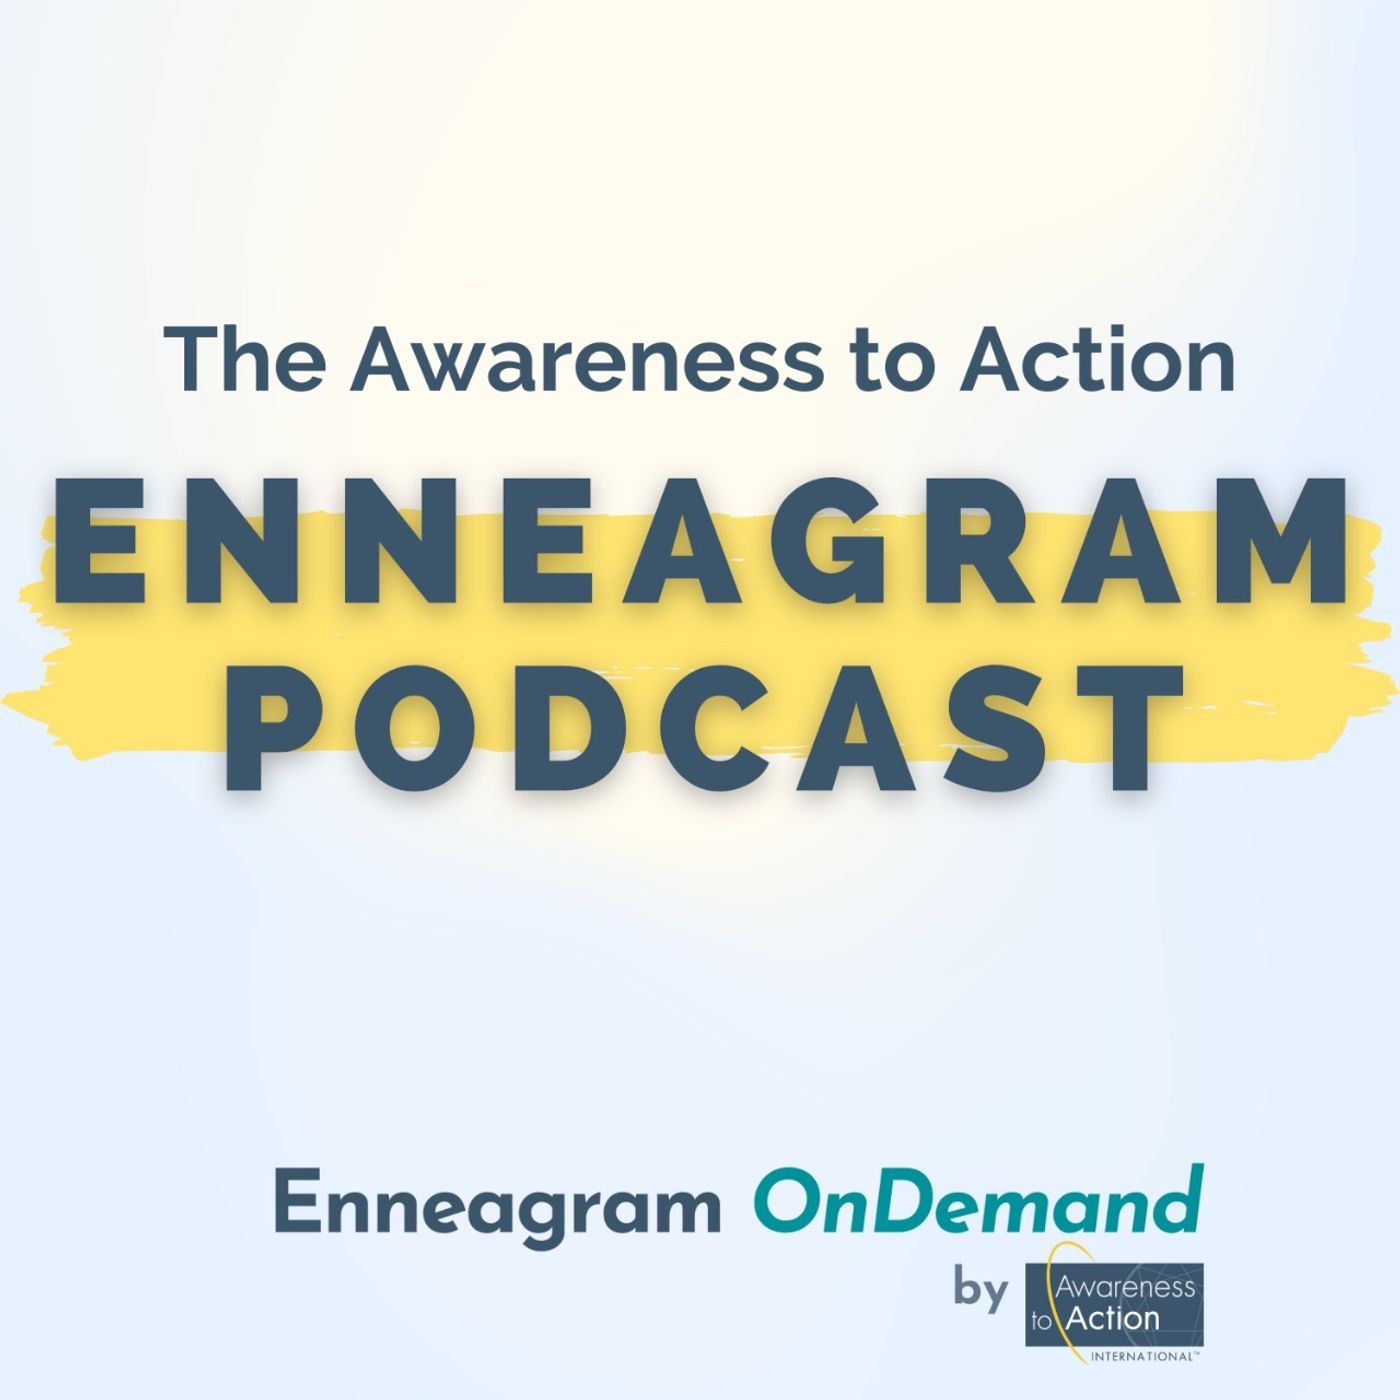 Artwork for podcast The Awareness to Action Enneagram Podcast